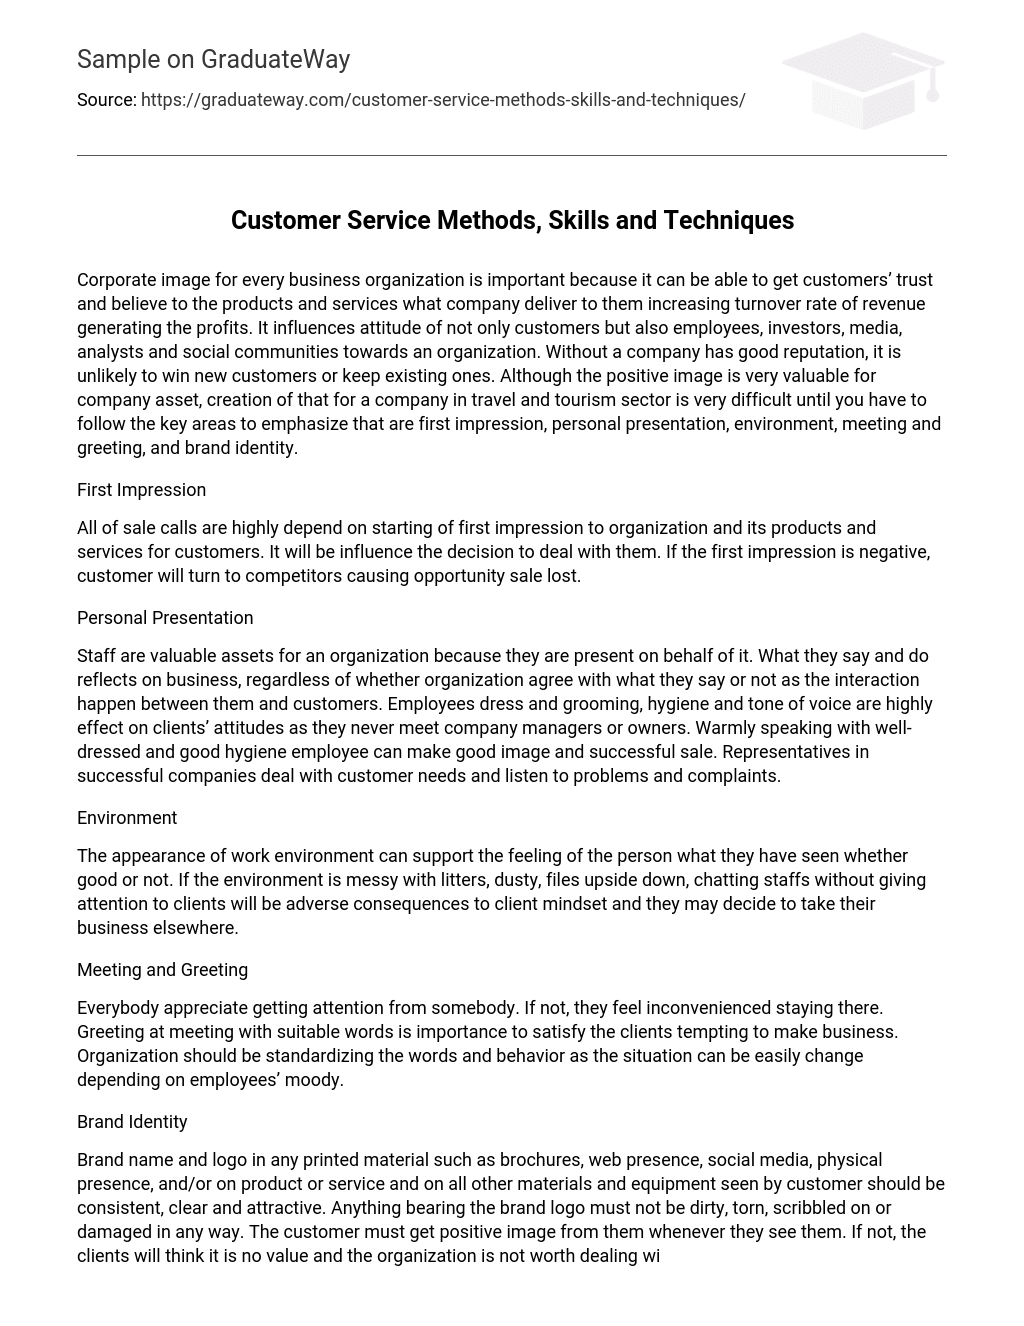 Customer Service Methods, Skills and Techniques